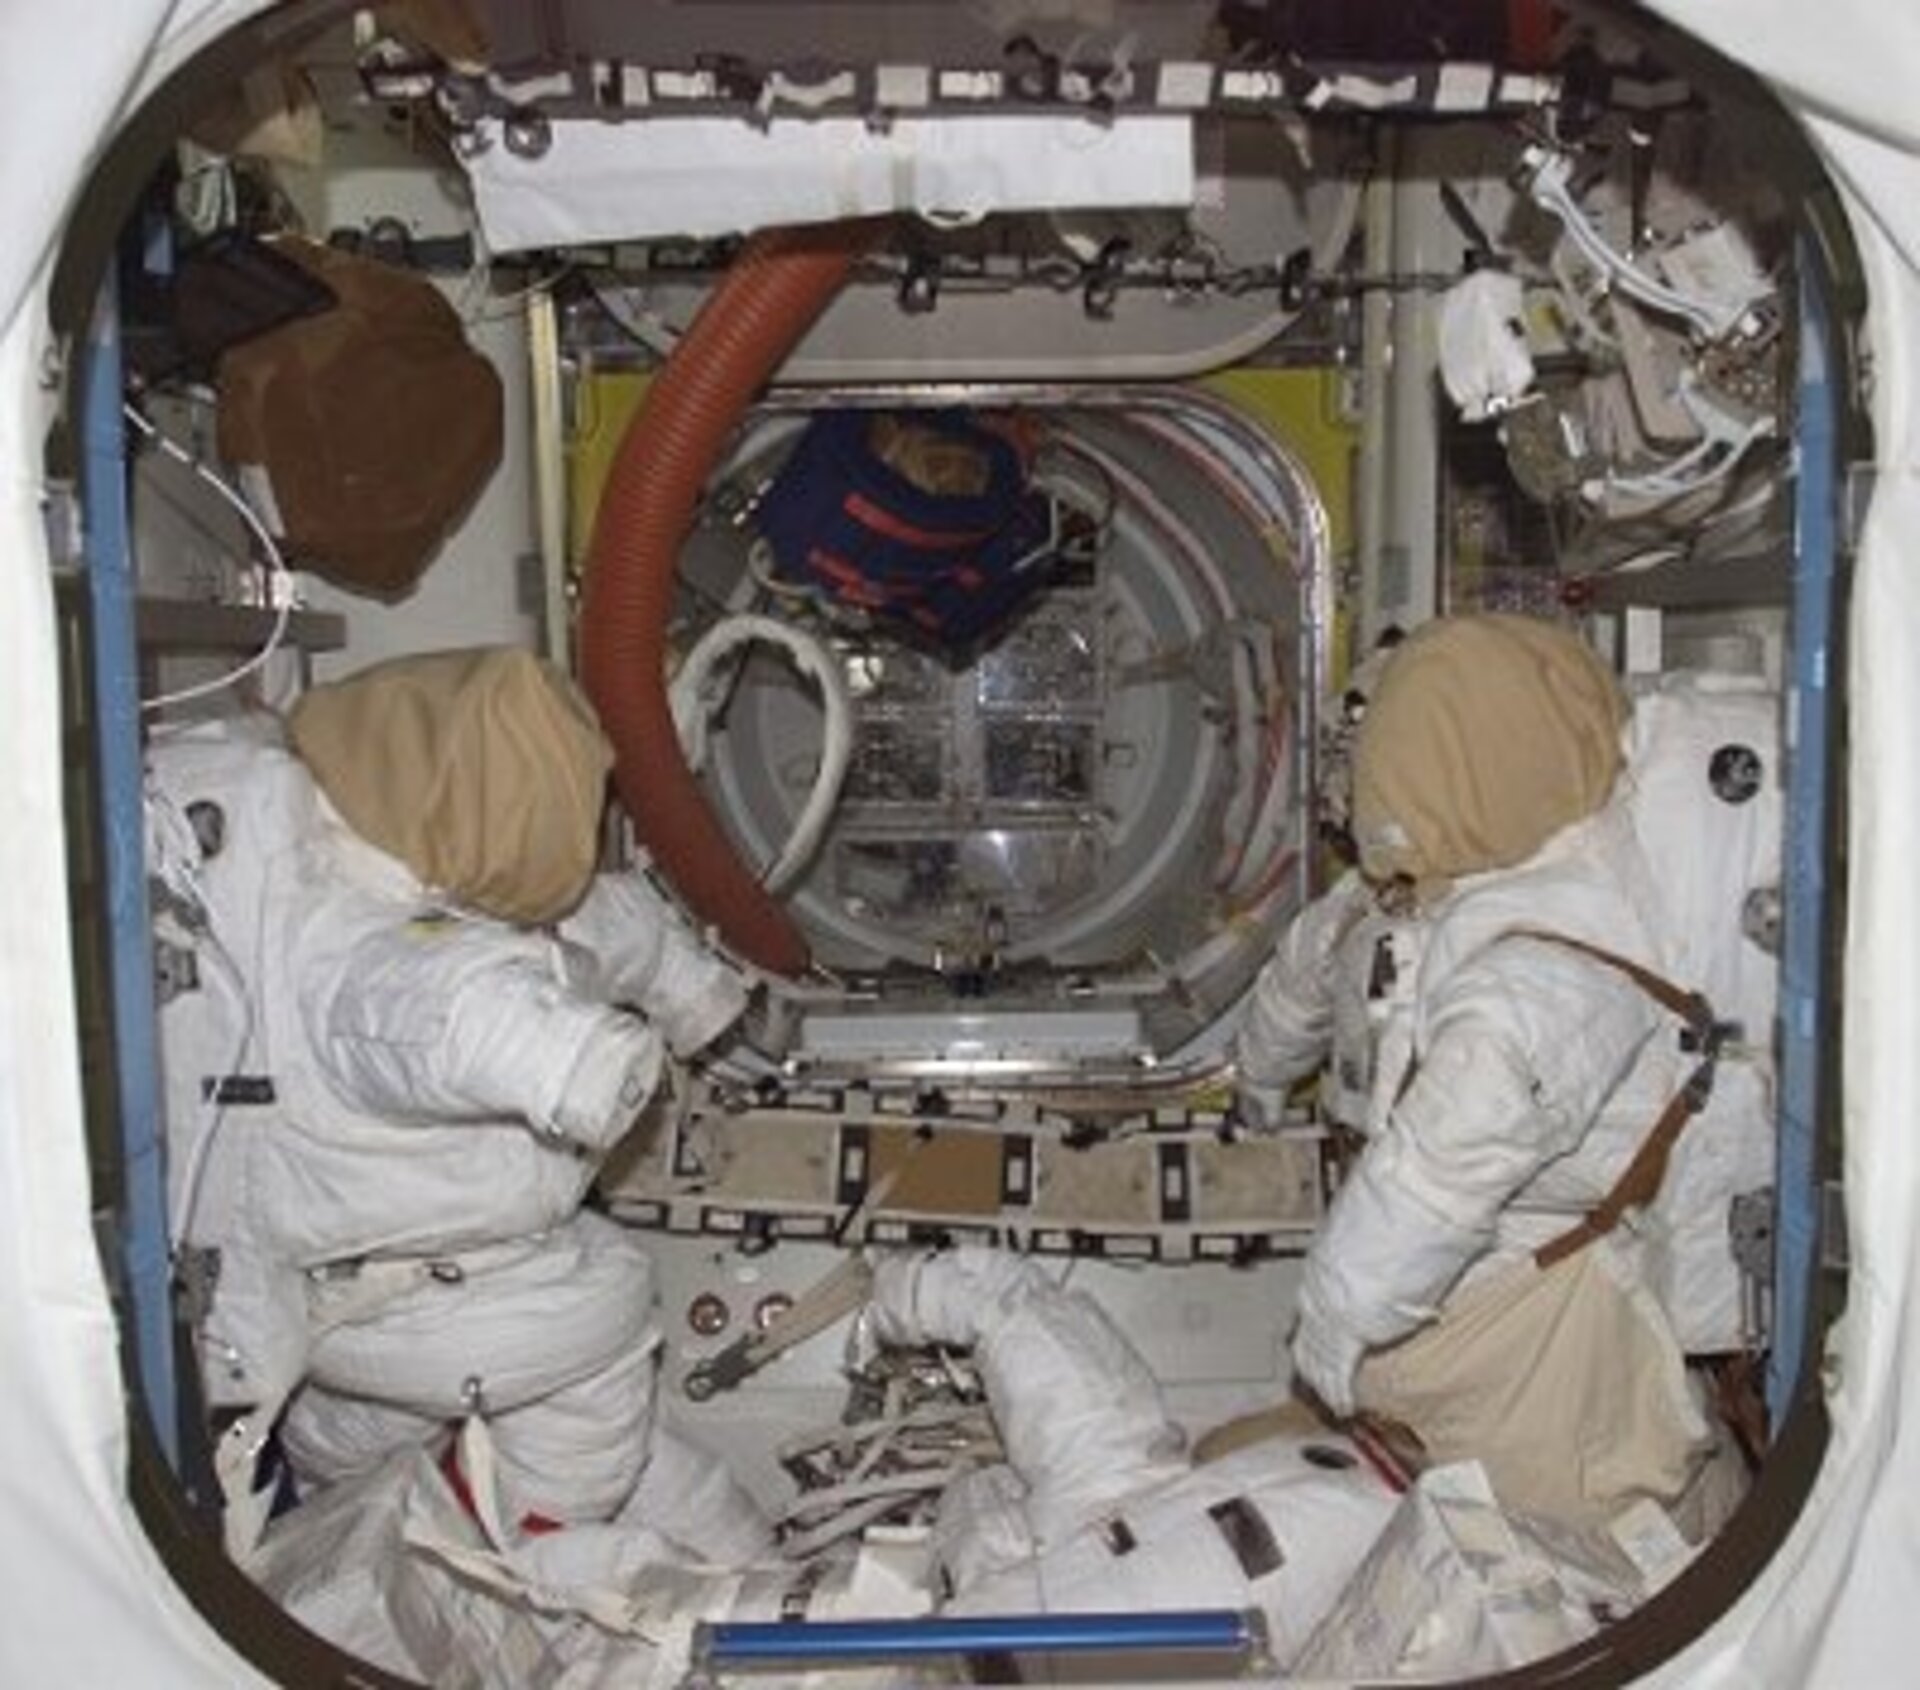 Quest Joint Airlock with two American EVA spacesuits